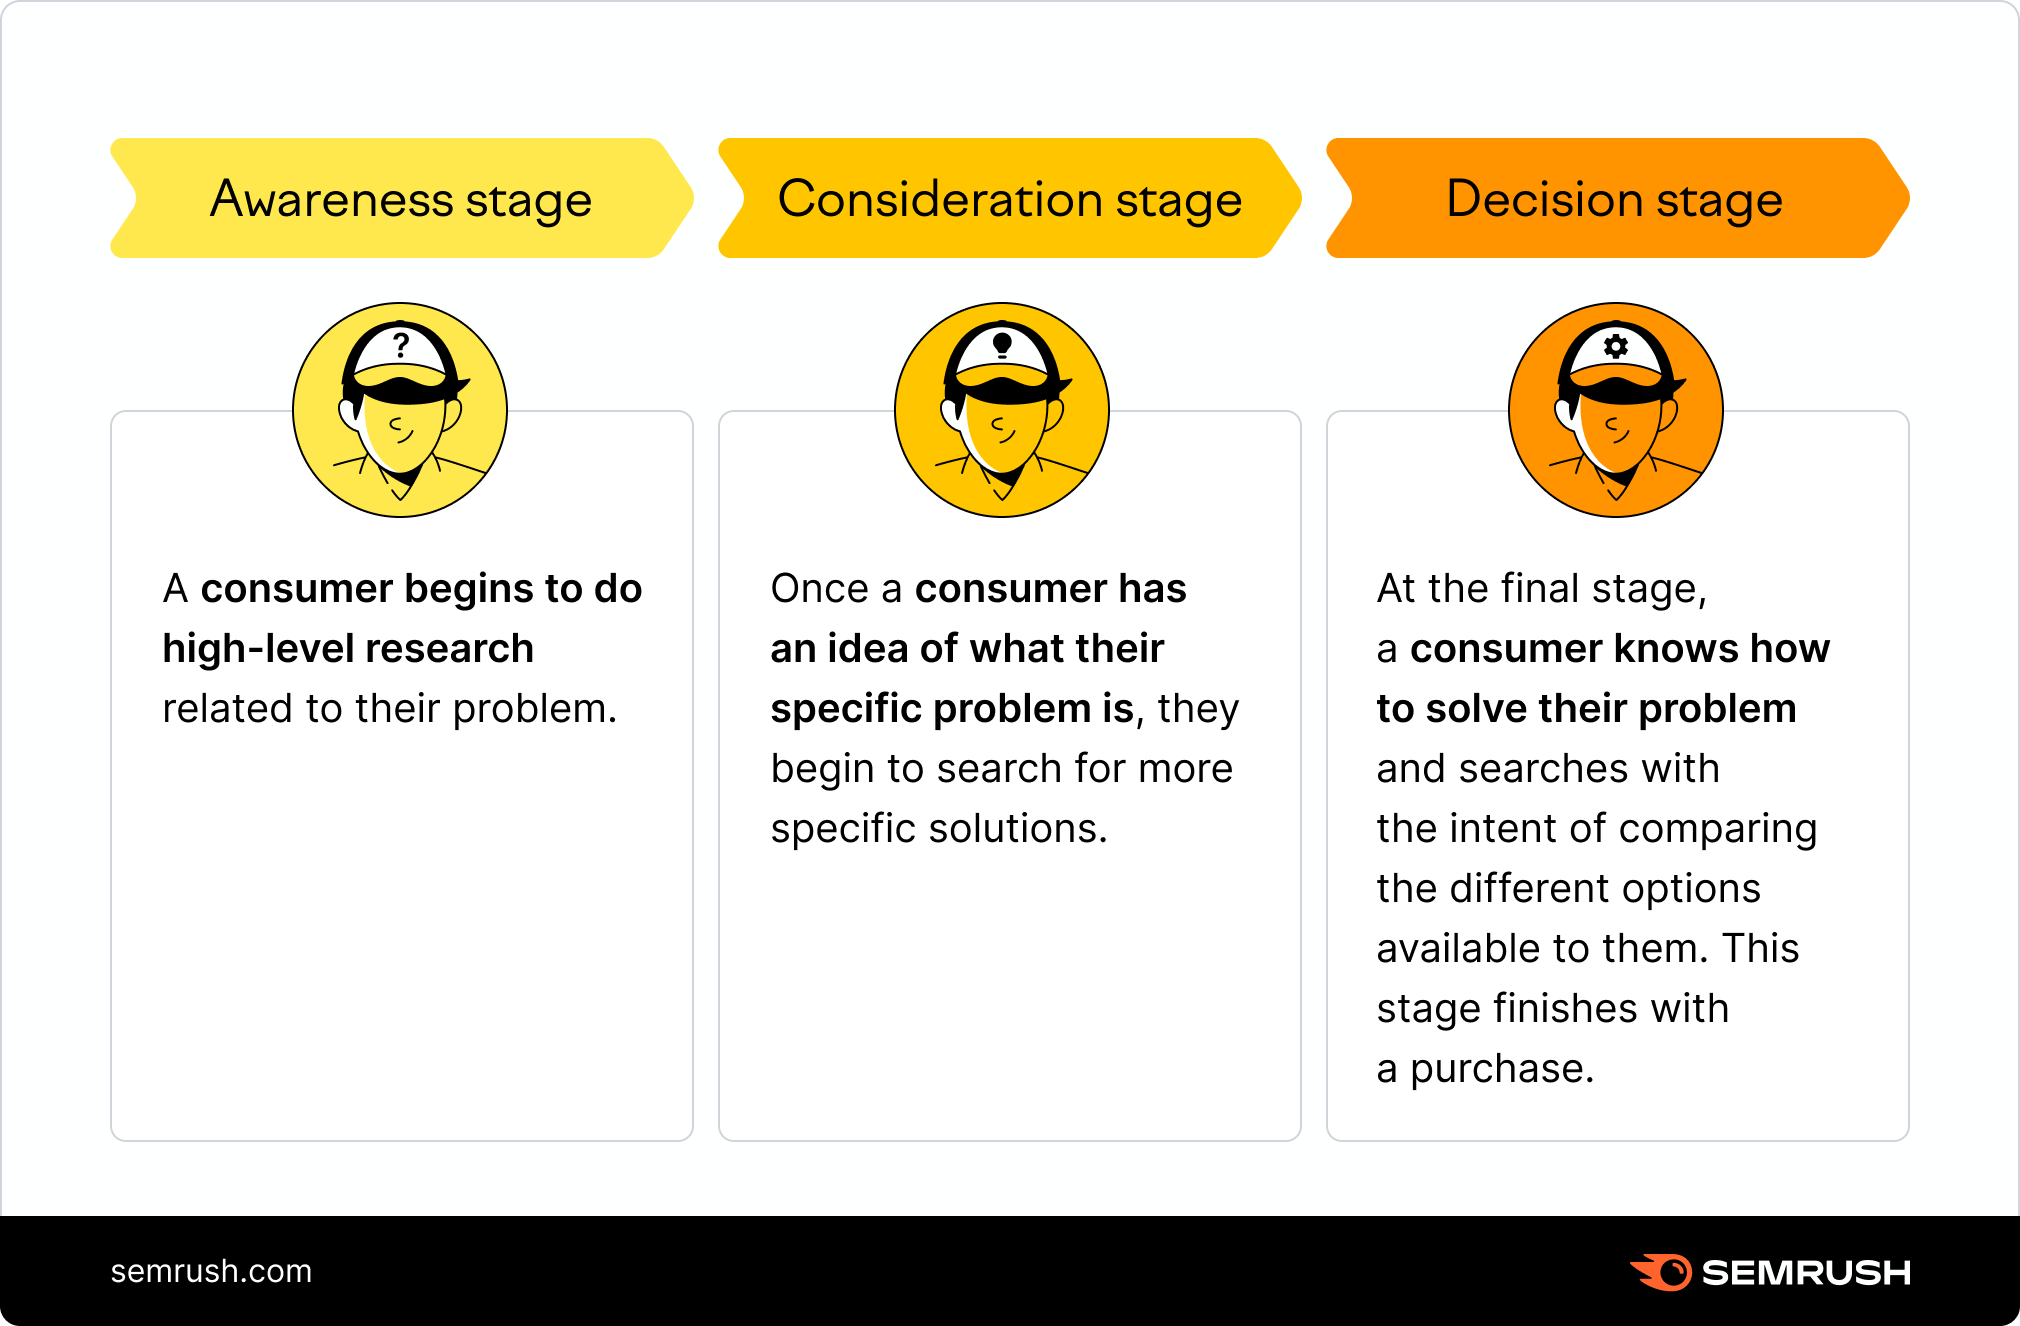 Online buying stages - Awareness - Consideration - Decision